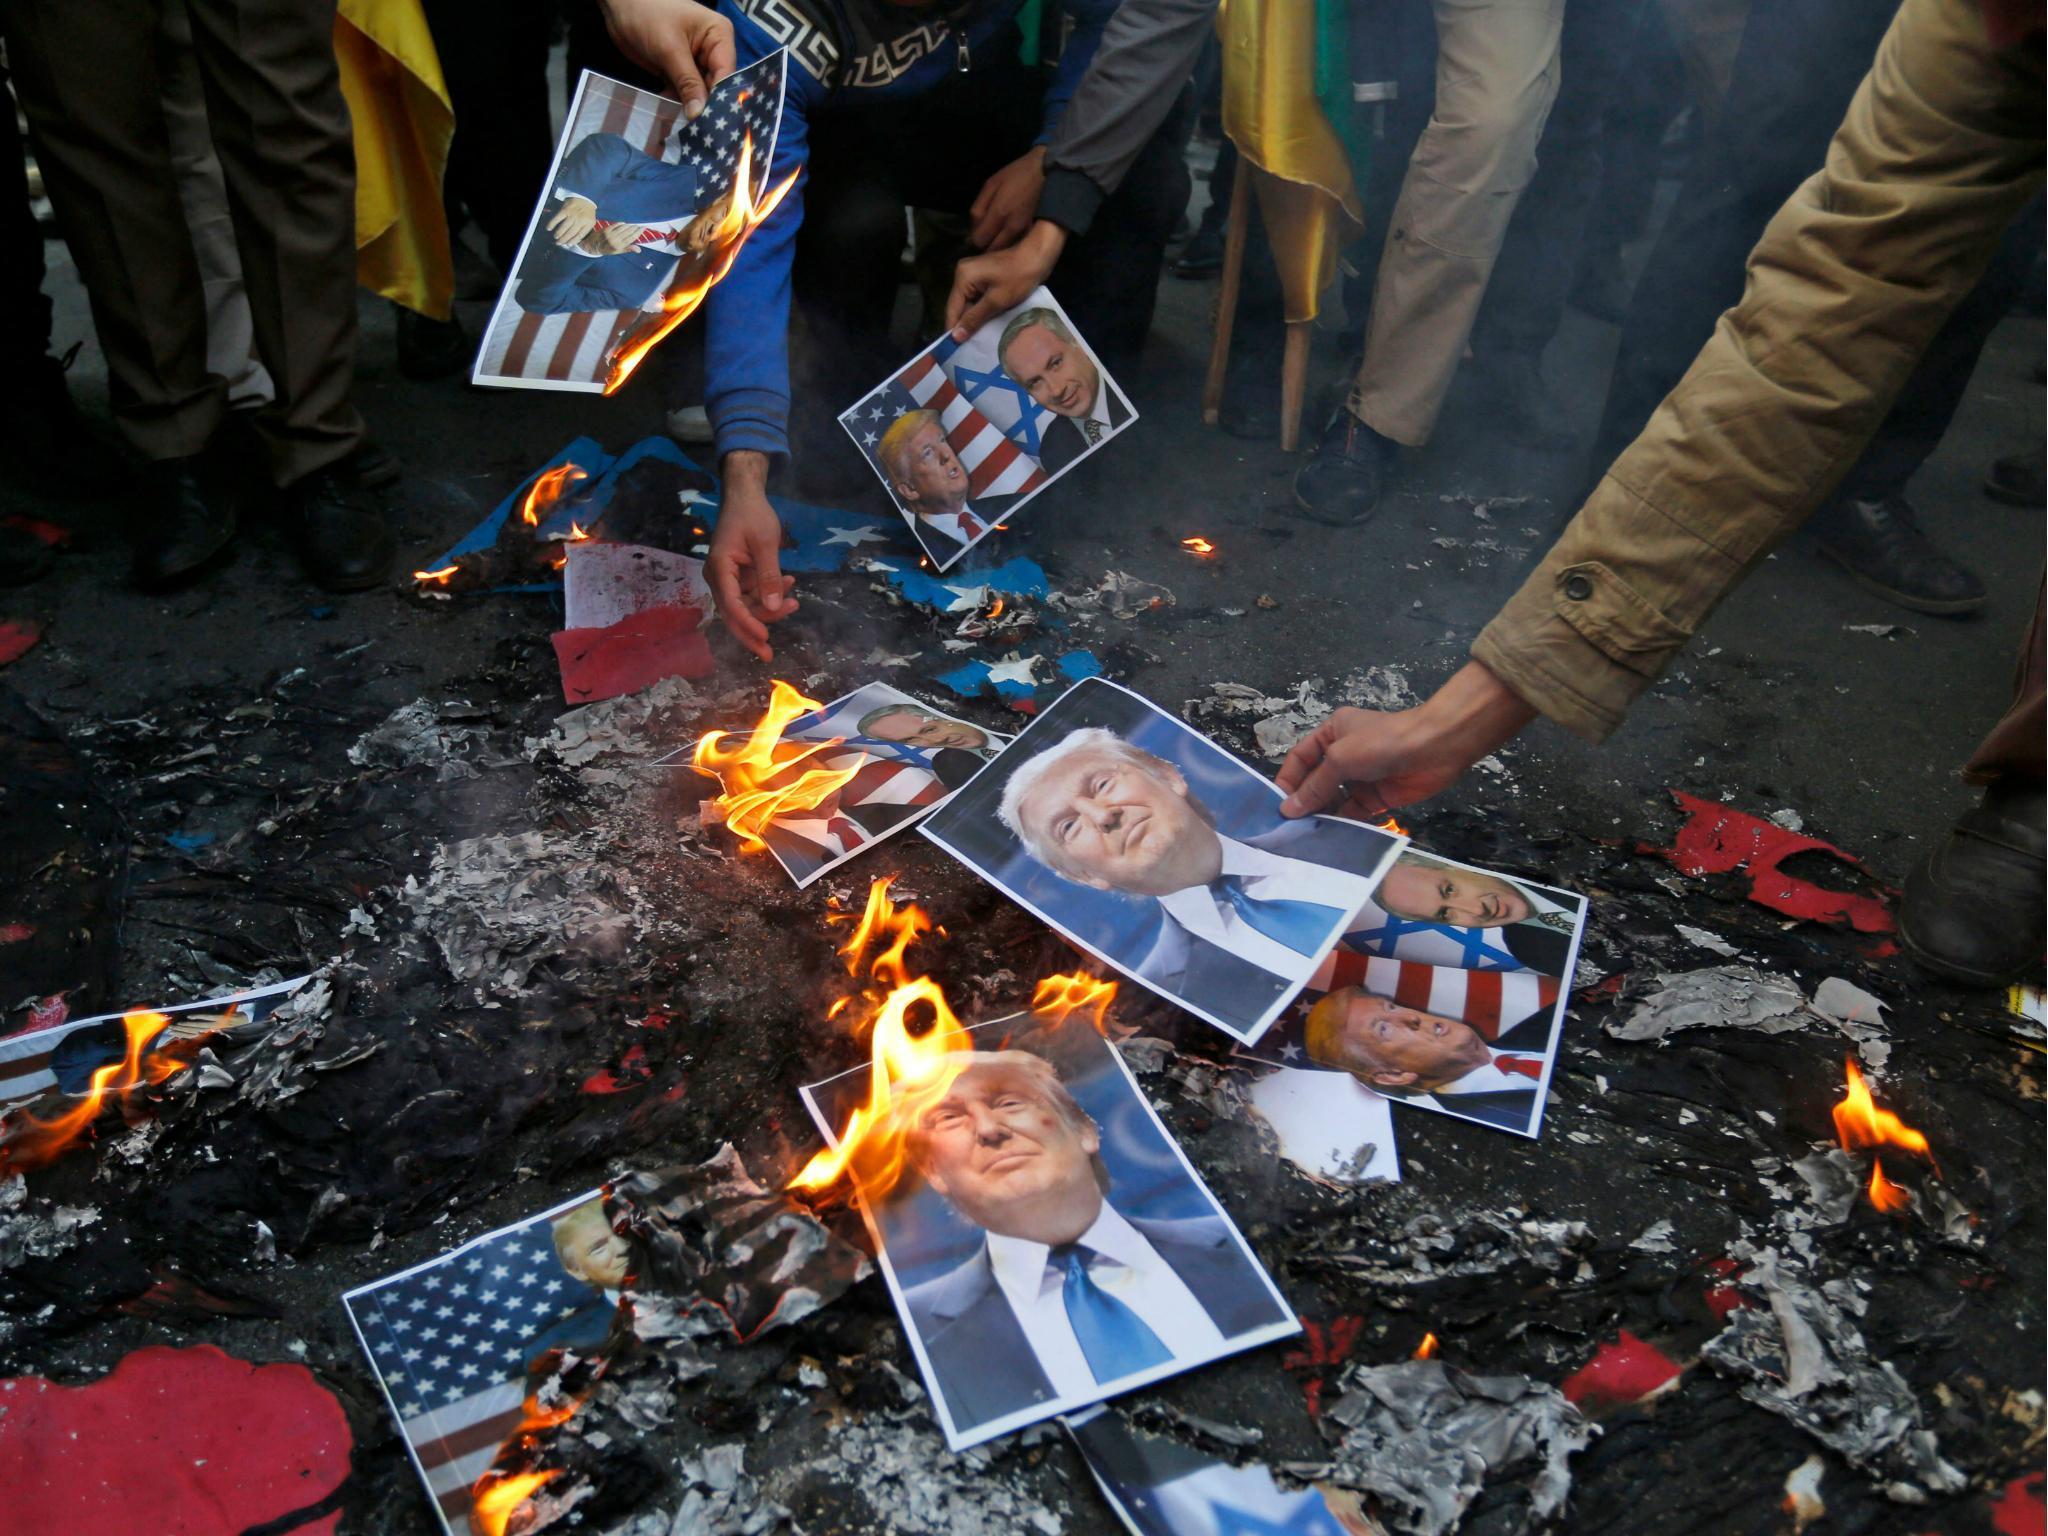 Portraits of US President Donald Trump were burned during a demonstration in the capital Tehran last month